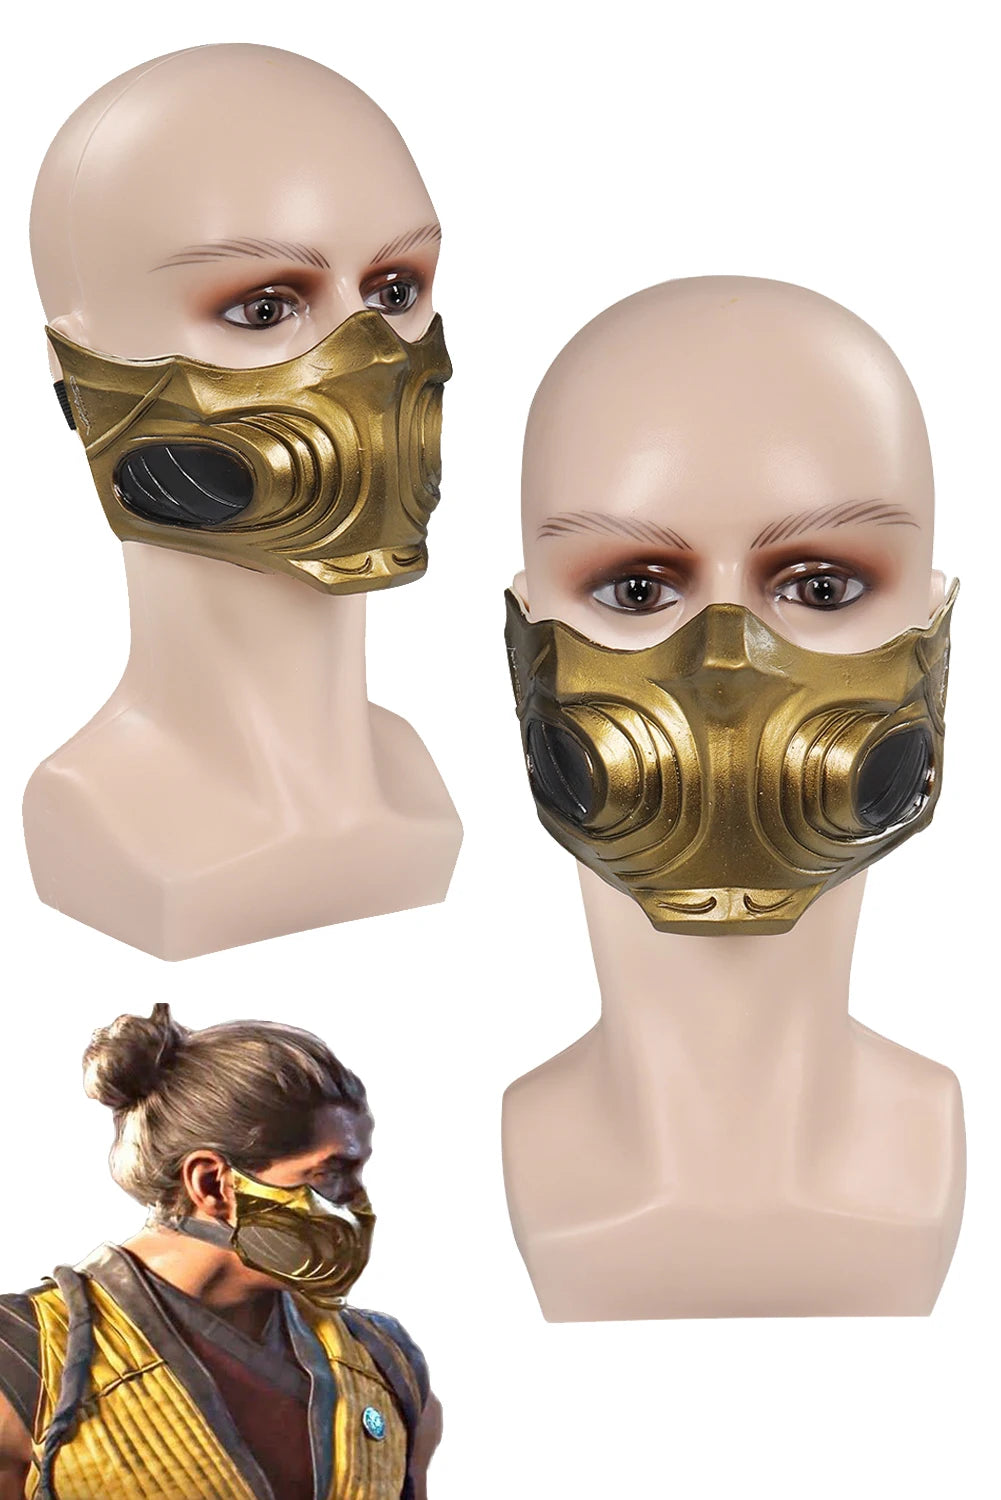 Scorpion Cosplay Fantasy Print Jumpsuit Mask - Inspired by Anime Game Mortal Kombat, Ideal for Costume Disguise and Adult Men's Cosplay Roleplay Outfits-Only Mask-XS-